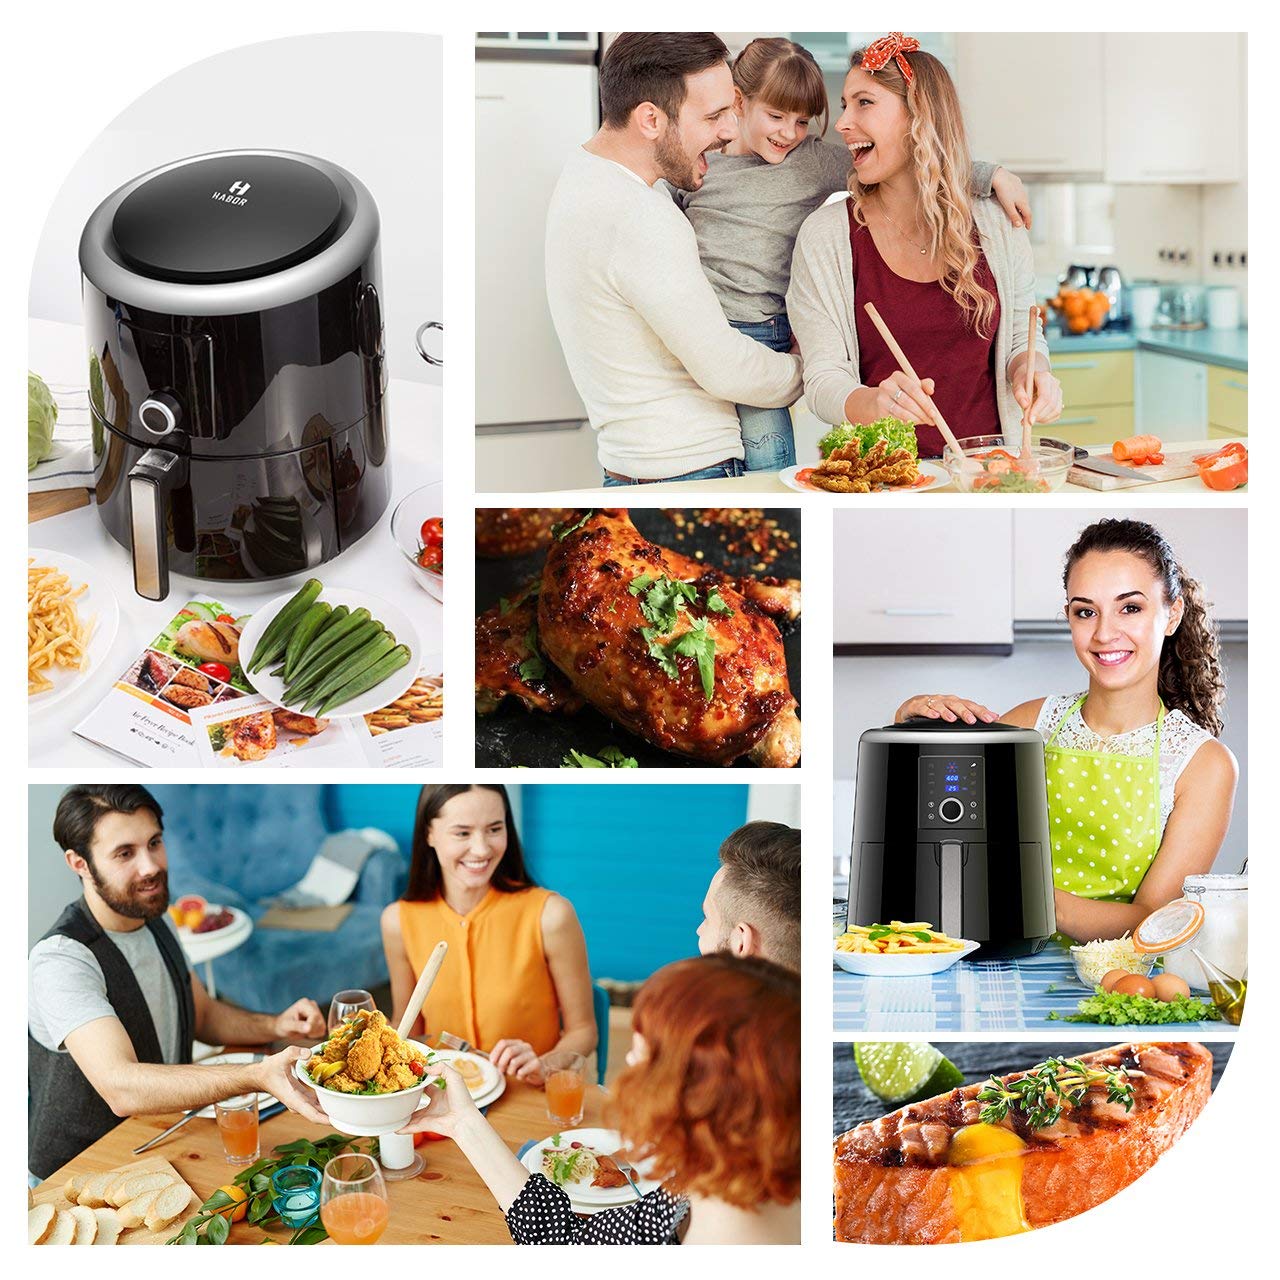 Digital TouchScreen 6QT Oilless Air Fryer Oven Habor Upgraded Air Fryer XL Detachable Basket Dishwasher Safe 8 Cooking Presets Electric Hot Air Cooker with Heat Preservation Function 